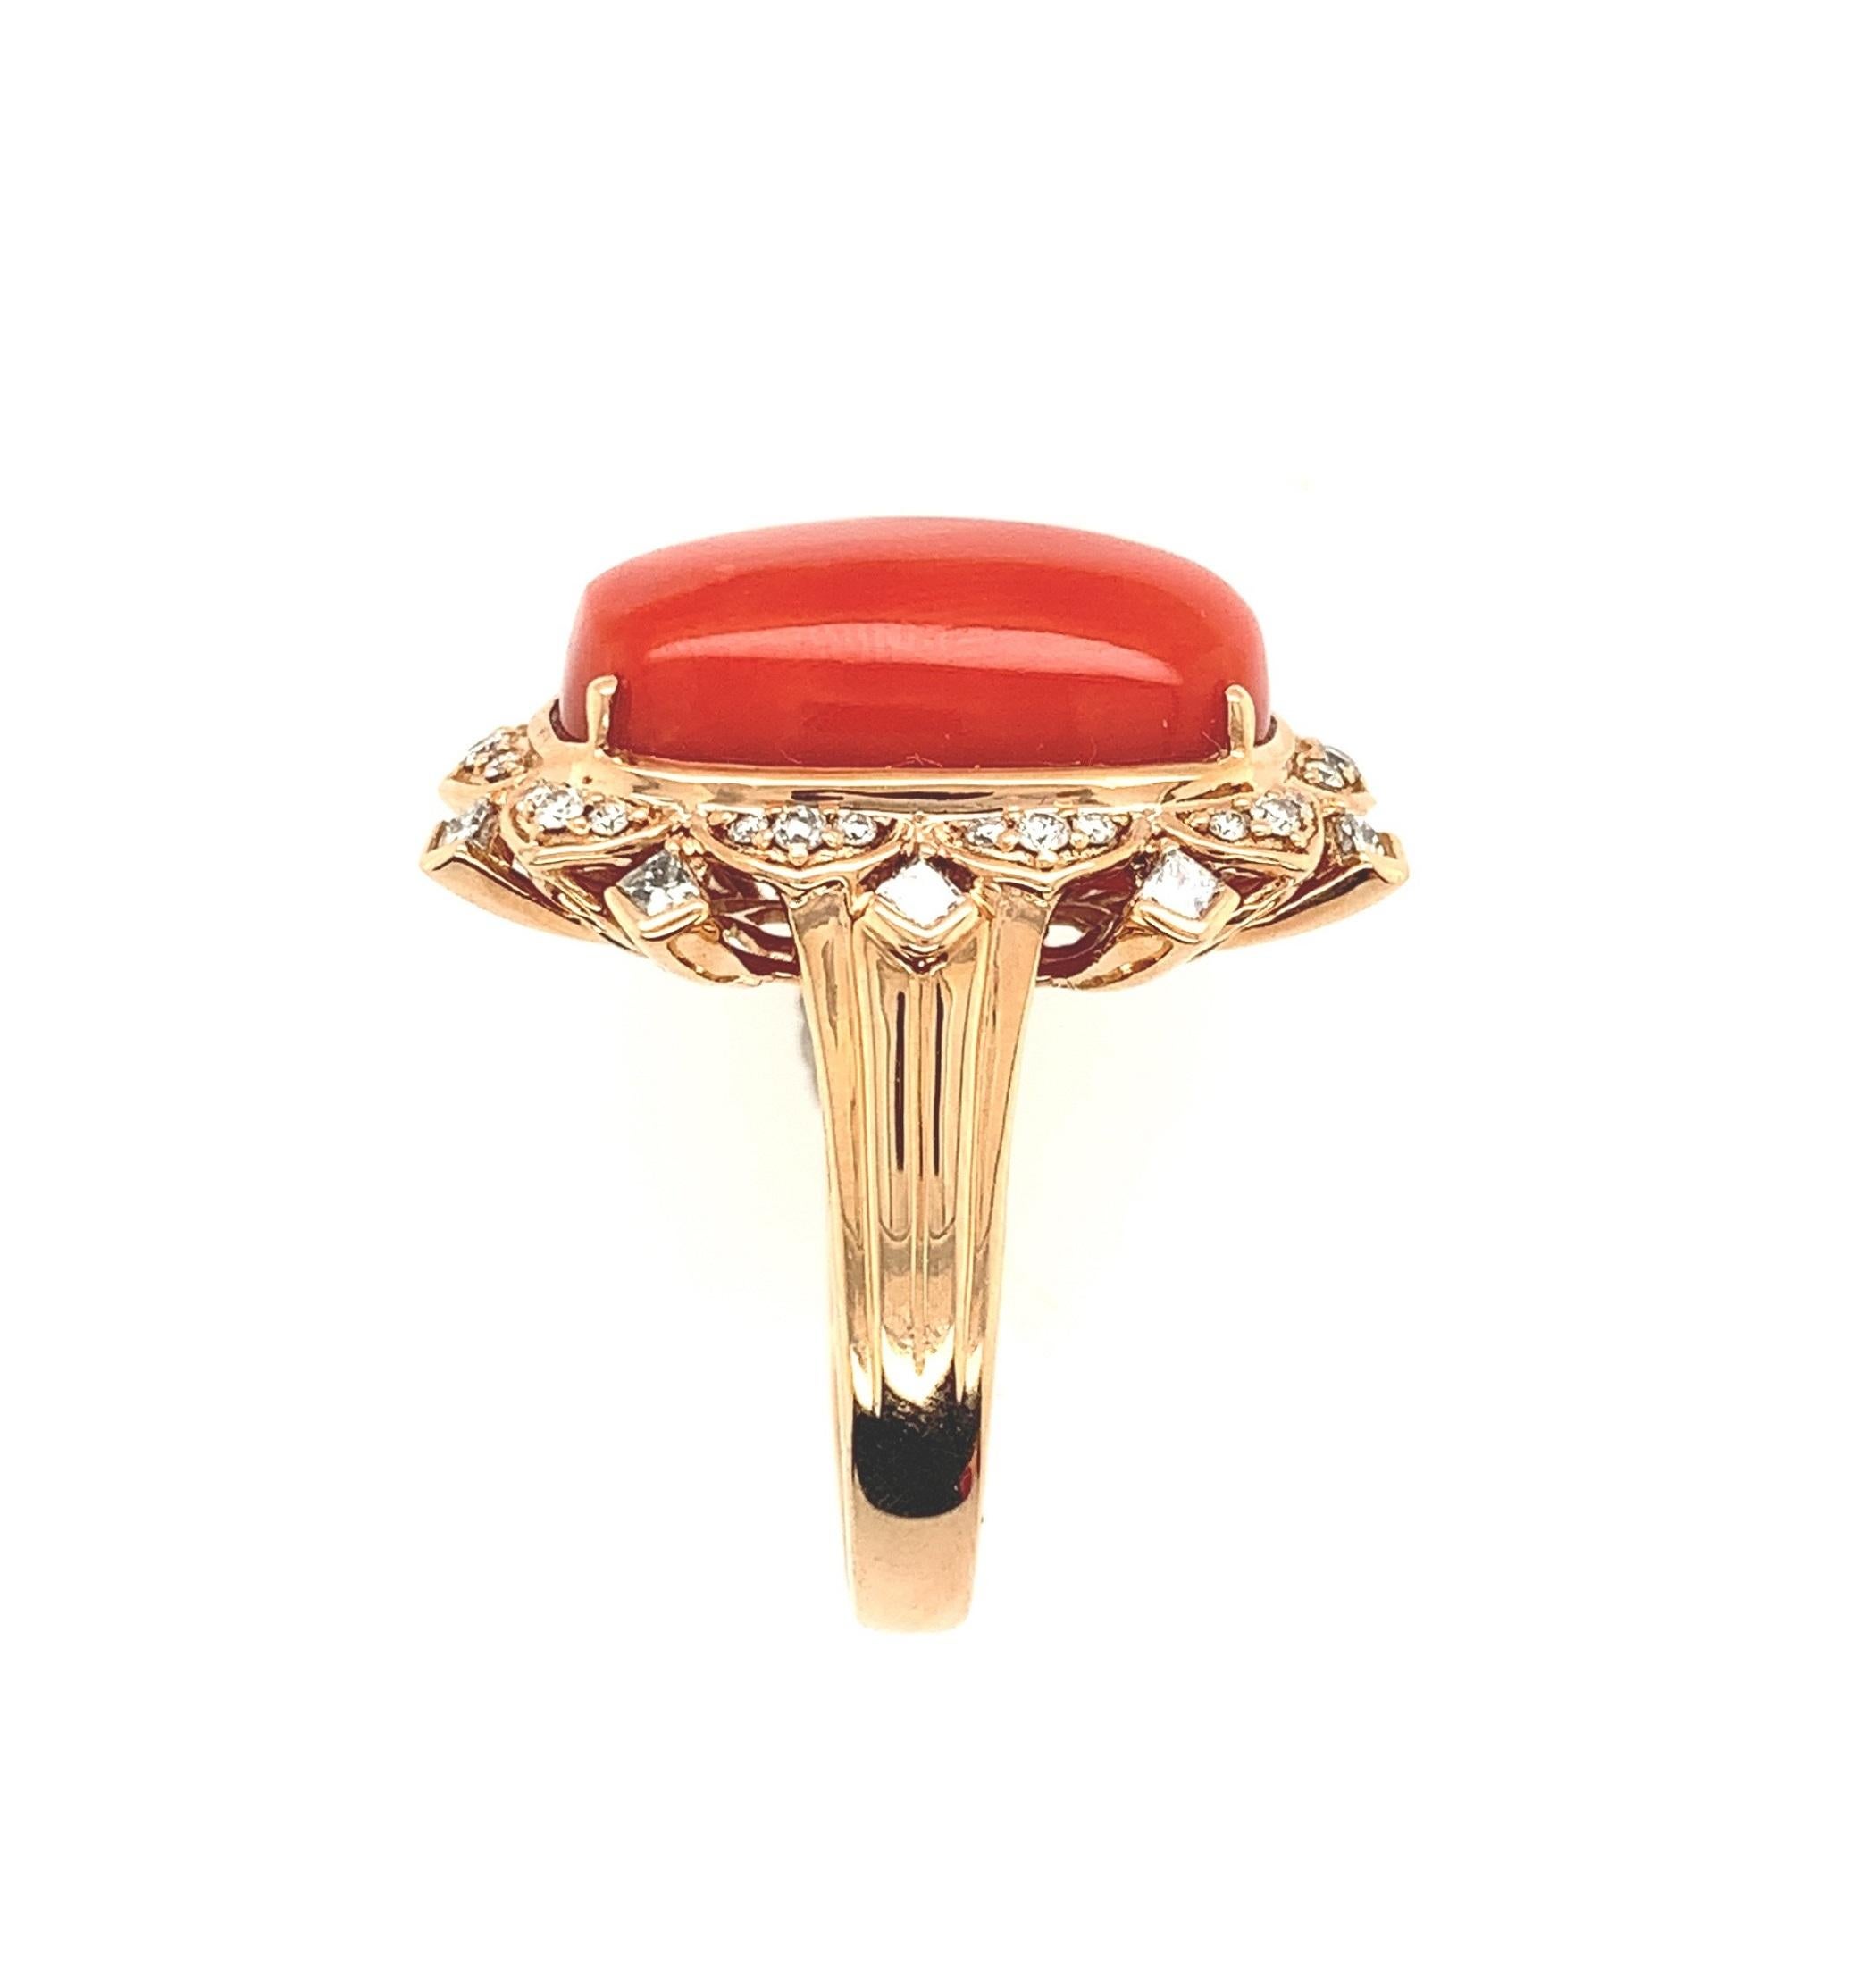 New 18K rose gold natural orange-red coral and diamond ring. Centered is a oval cushion cabochon coral weighing 17.65 carats and measures about 18mm x 12mm. Surrounding it are 30 round brilliant cut diamonds and 10 princess cut diamond accents